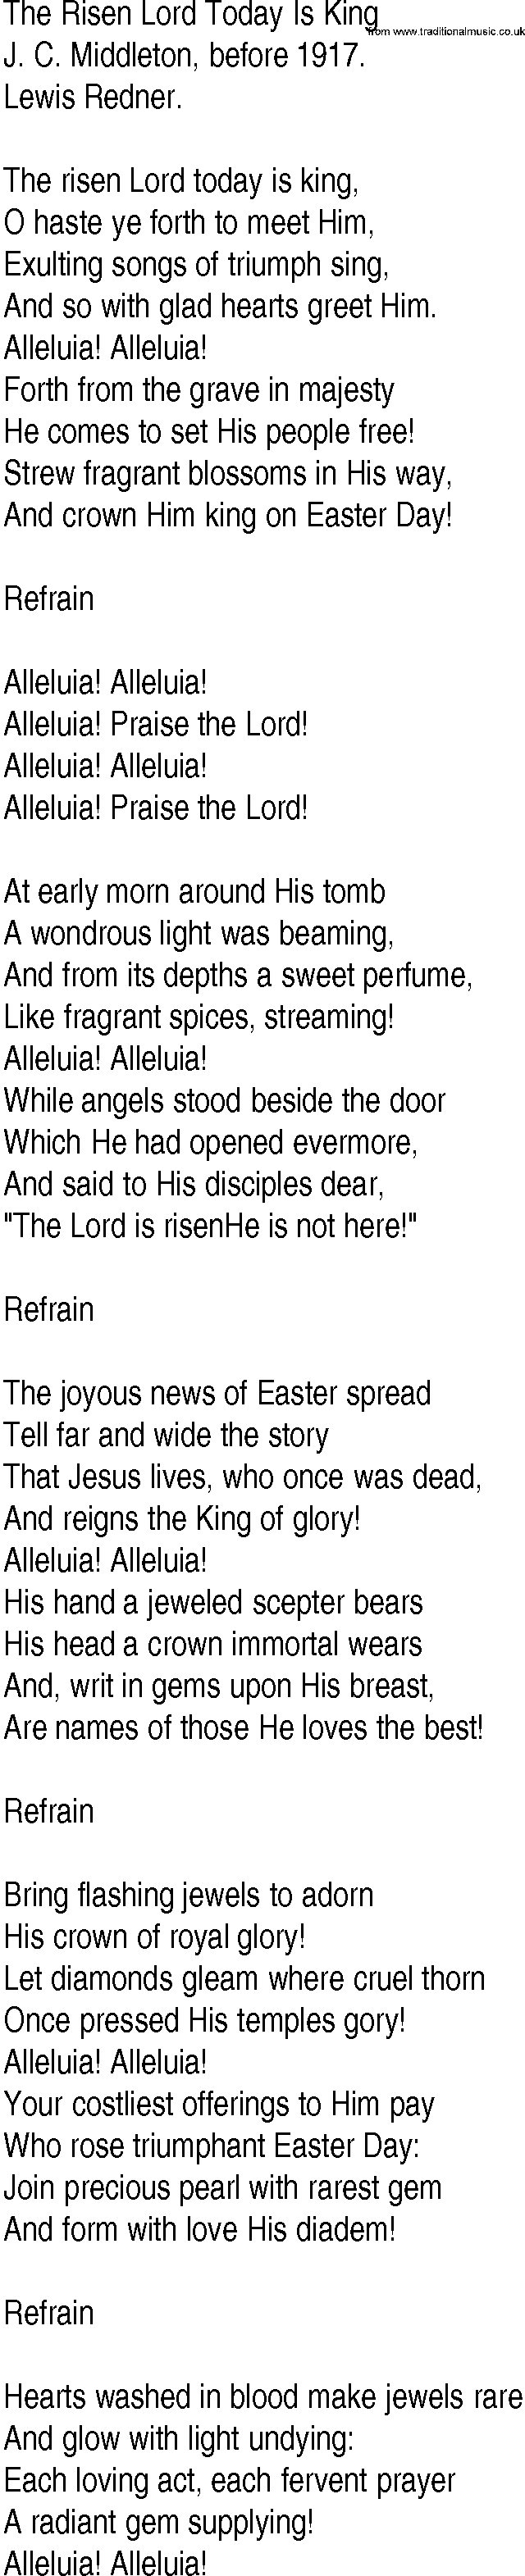 Hymn and Gospel Song: The Risen Lord Today Is King by J C Middleton before lyrics